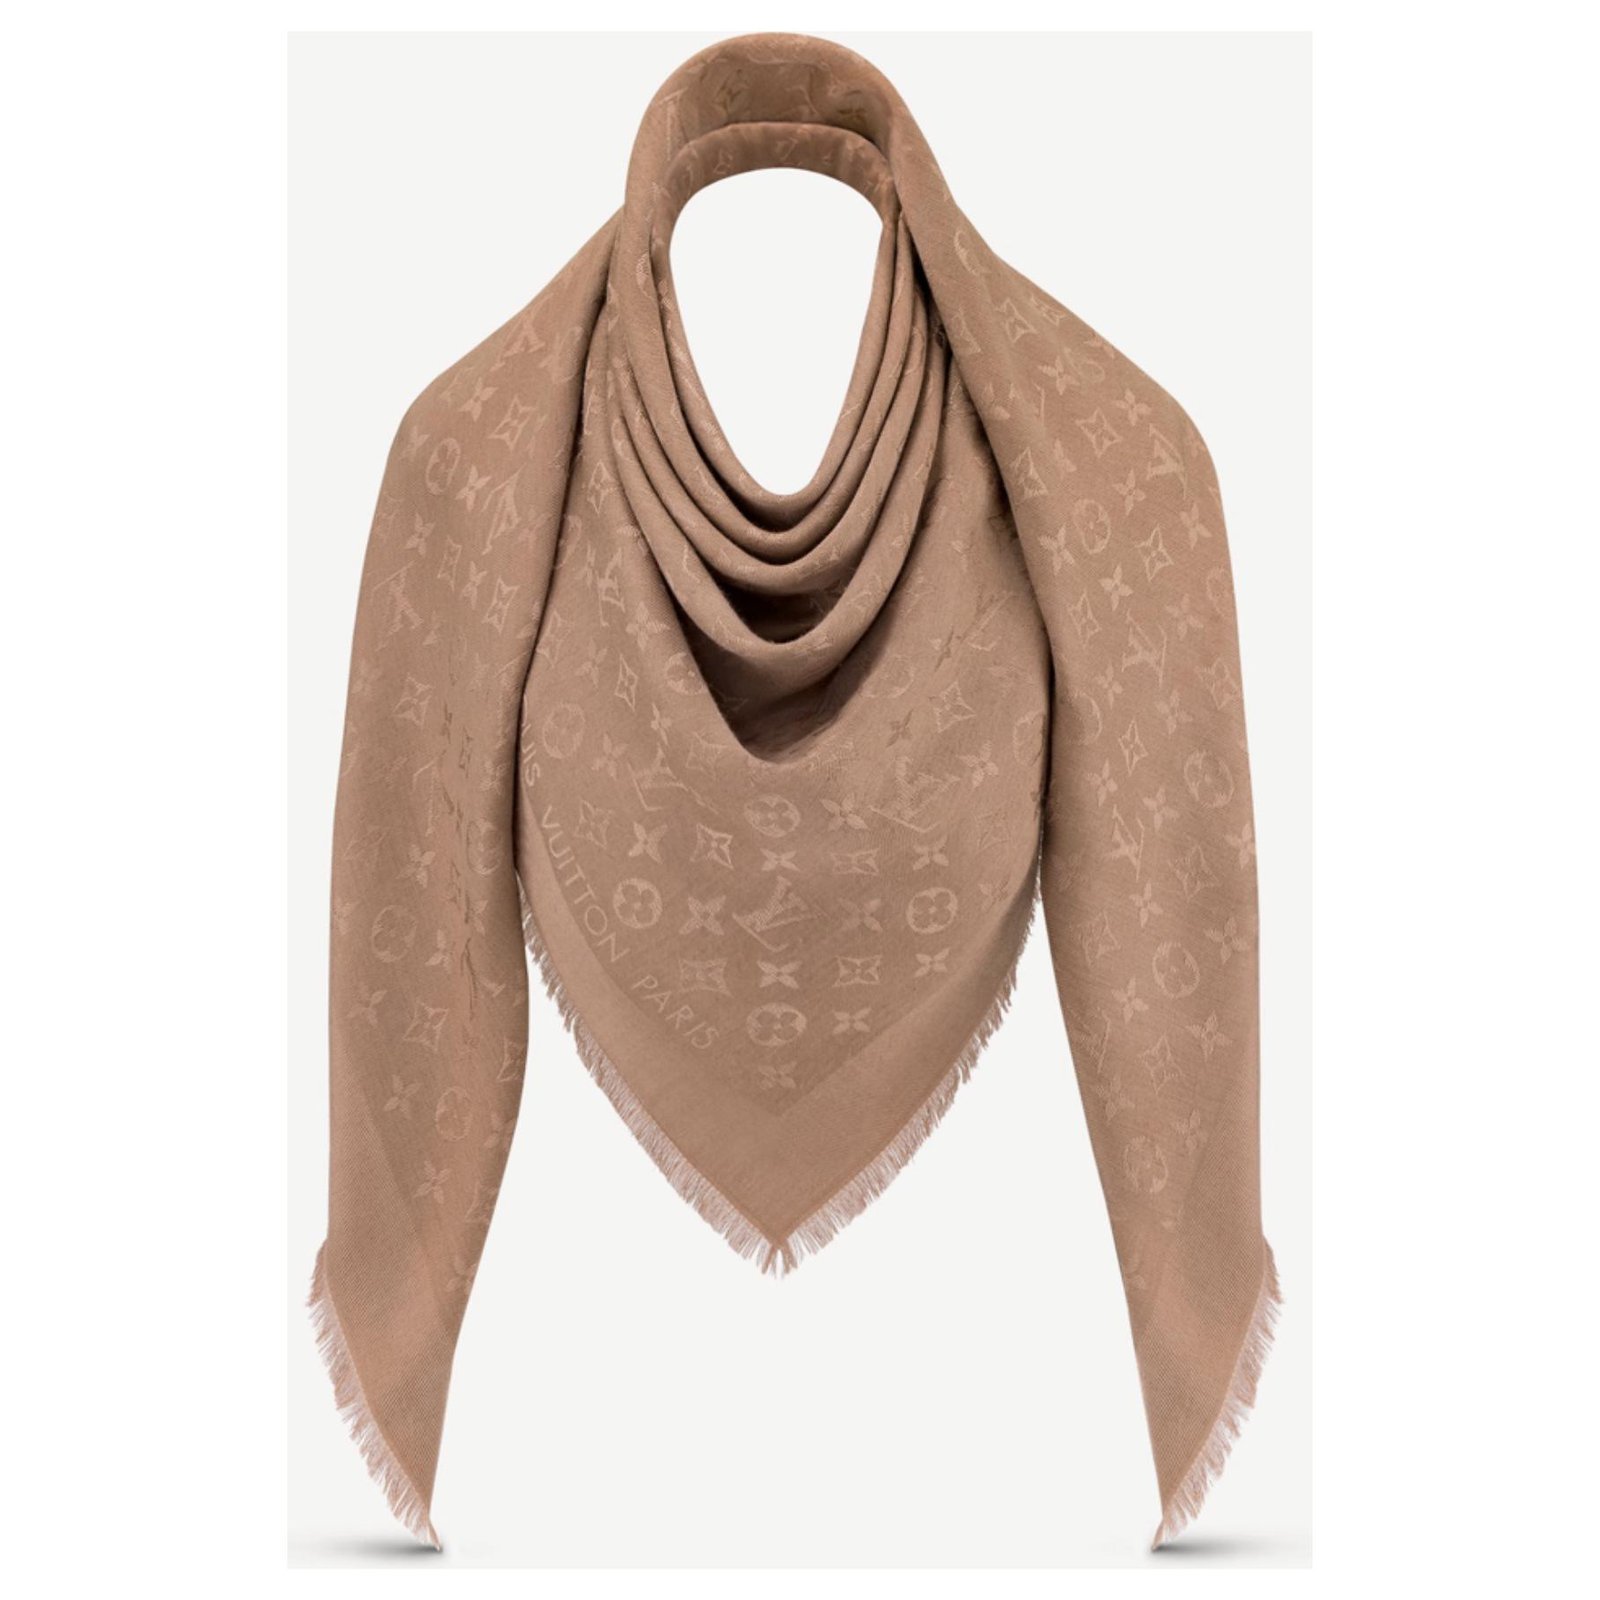 Louis Vuitton - Scialle Monogram - Scarf in Italy